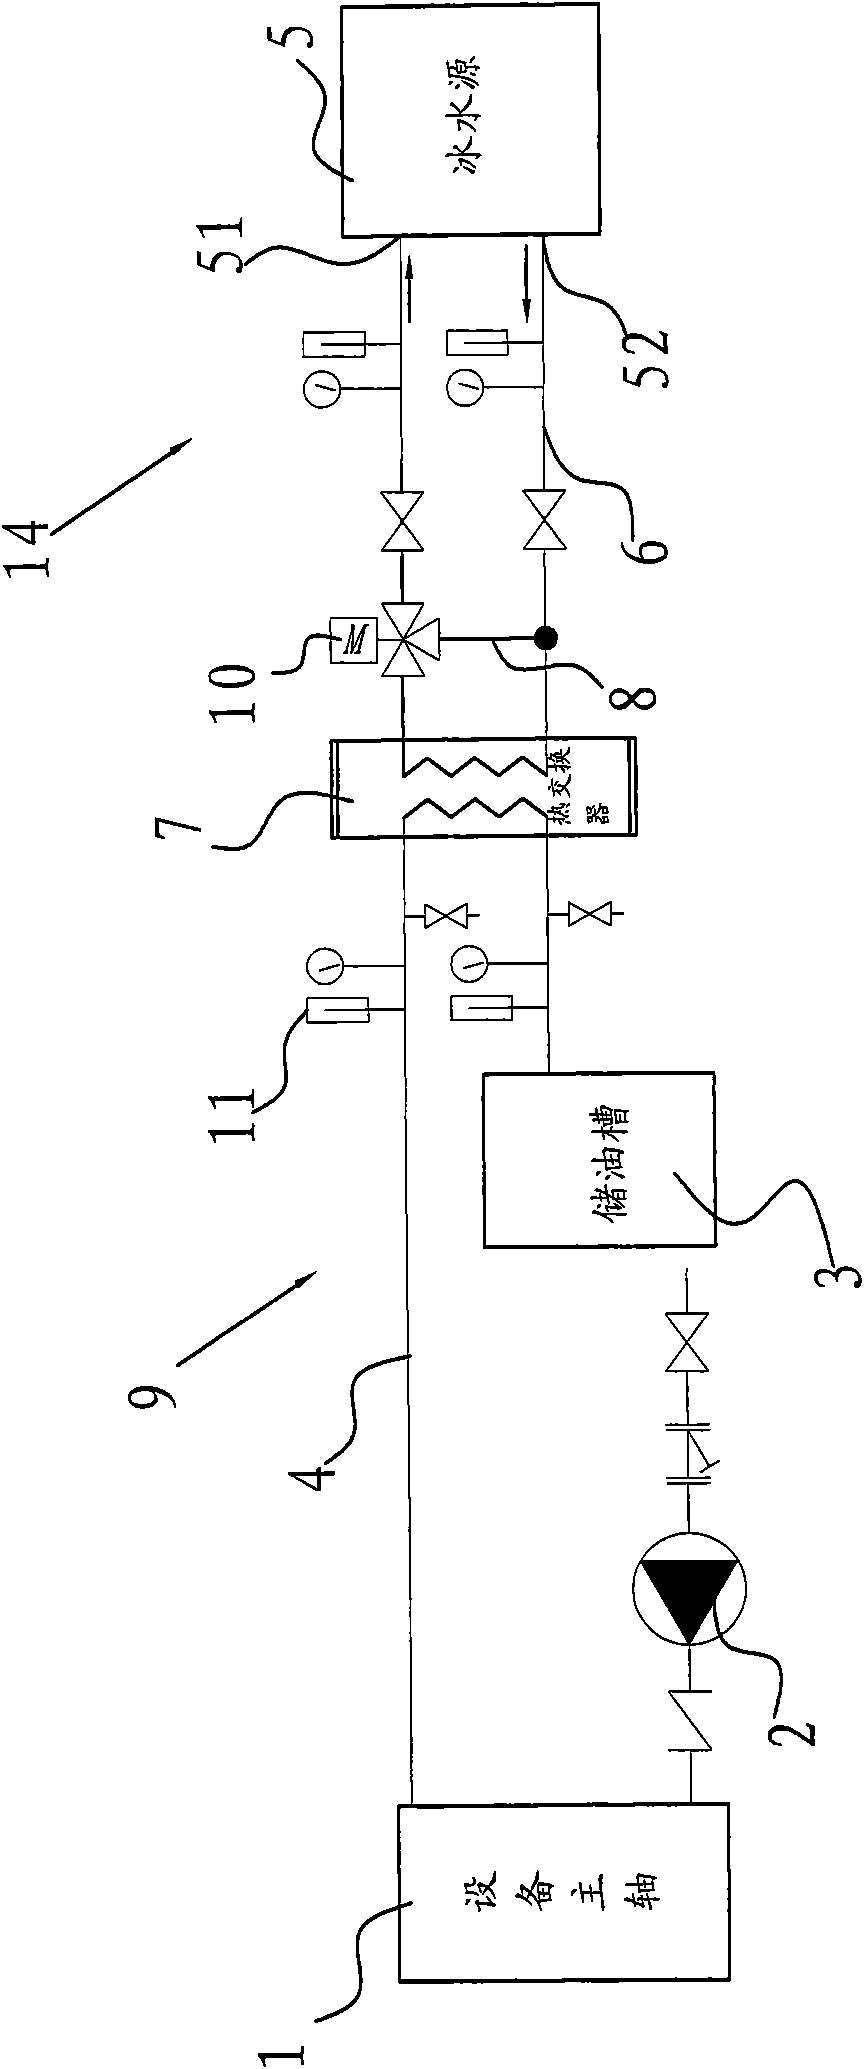 Liquid cooling system for device